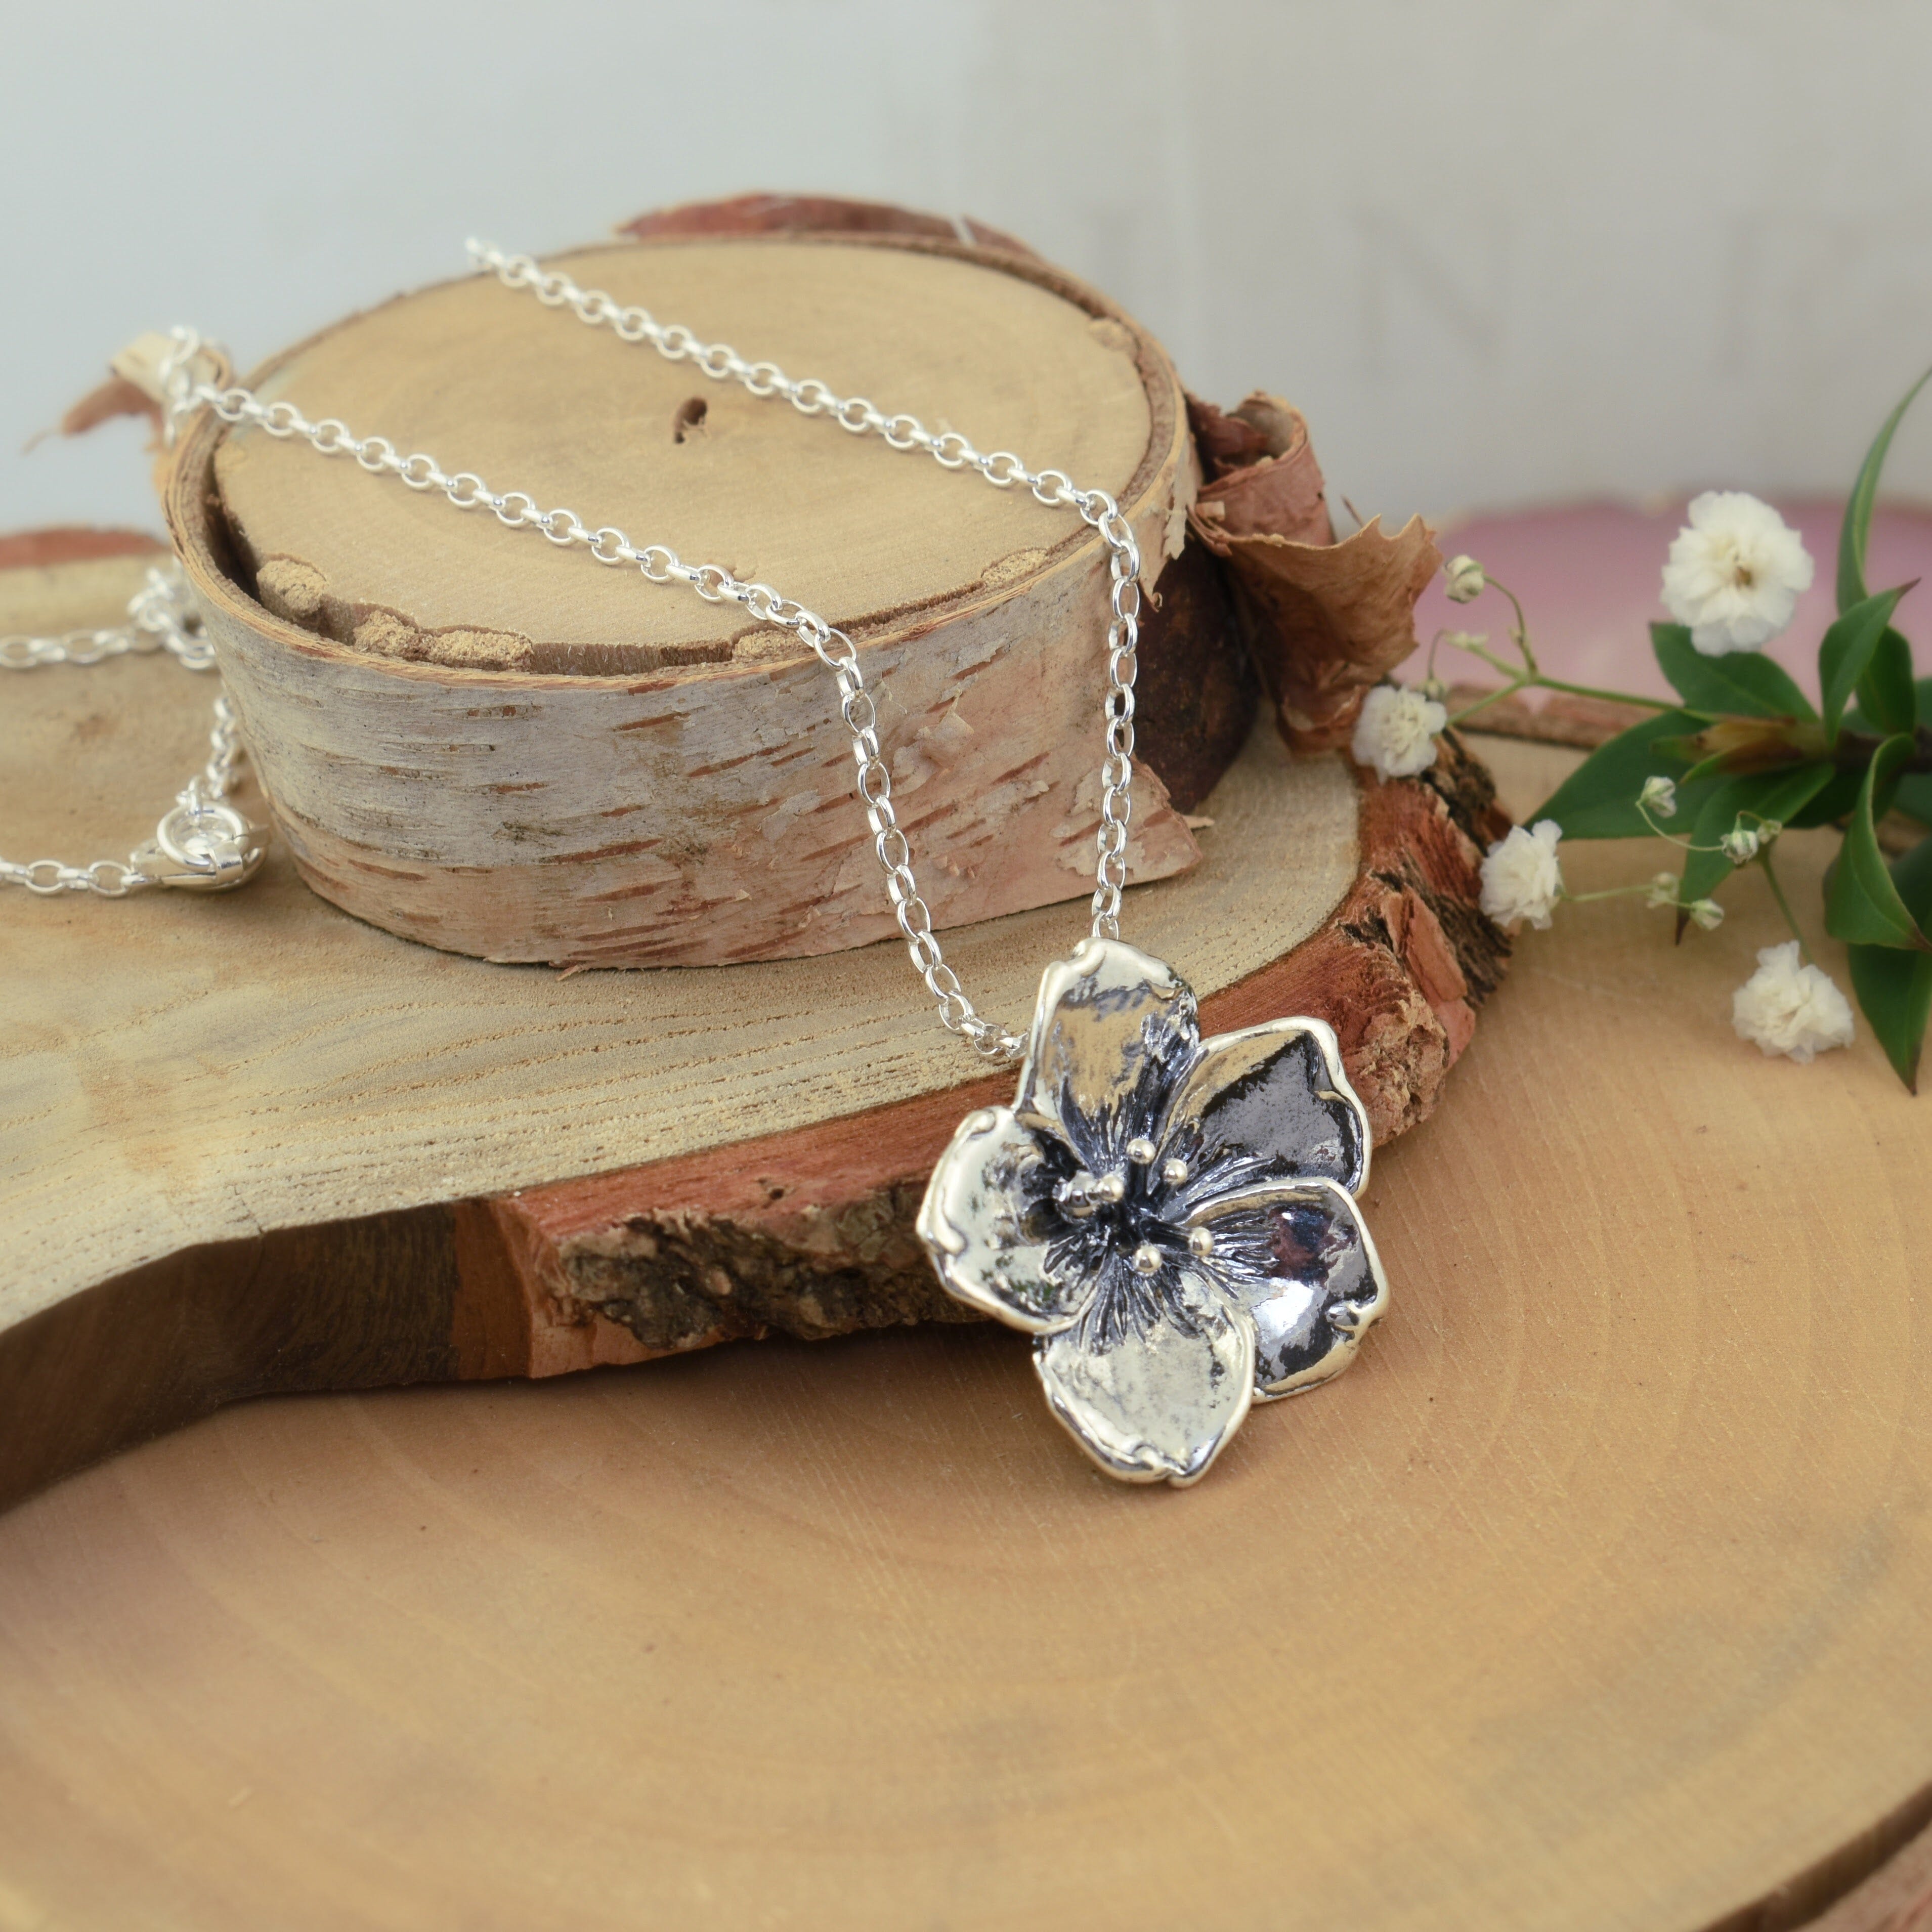 Cherry Blossom Necklace in sterling silver